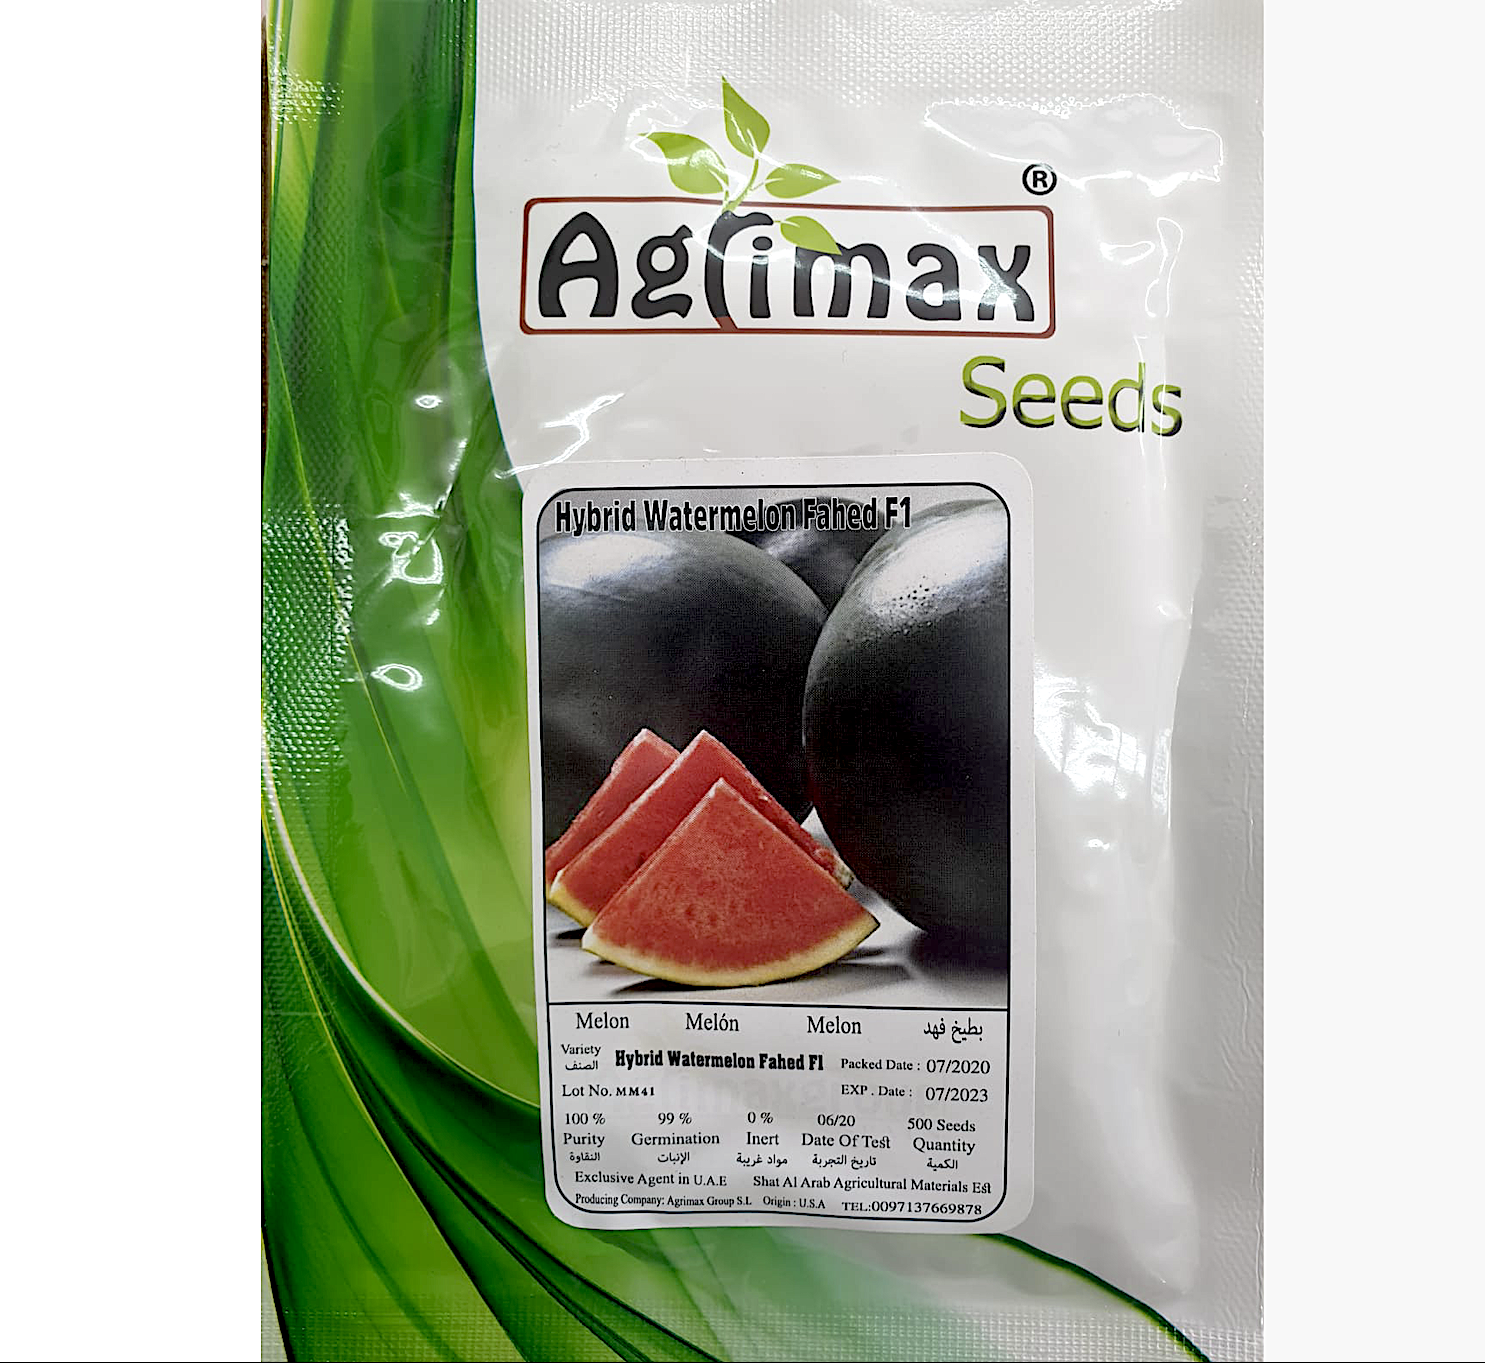 Watermelon Fruit Seeds "Fahed F1 Hybrid" by Agrimax